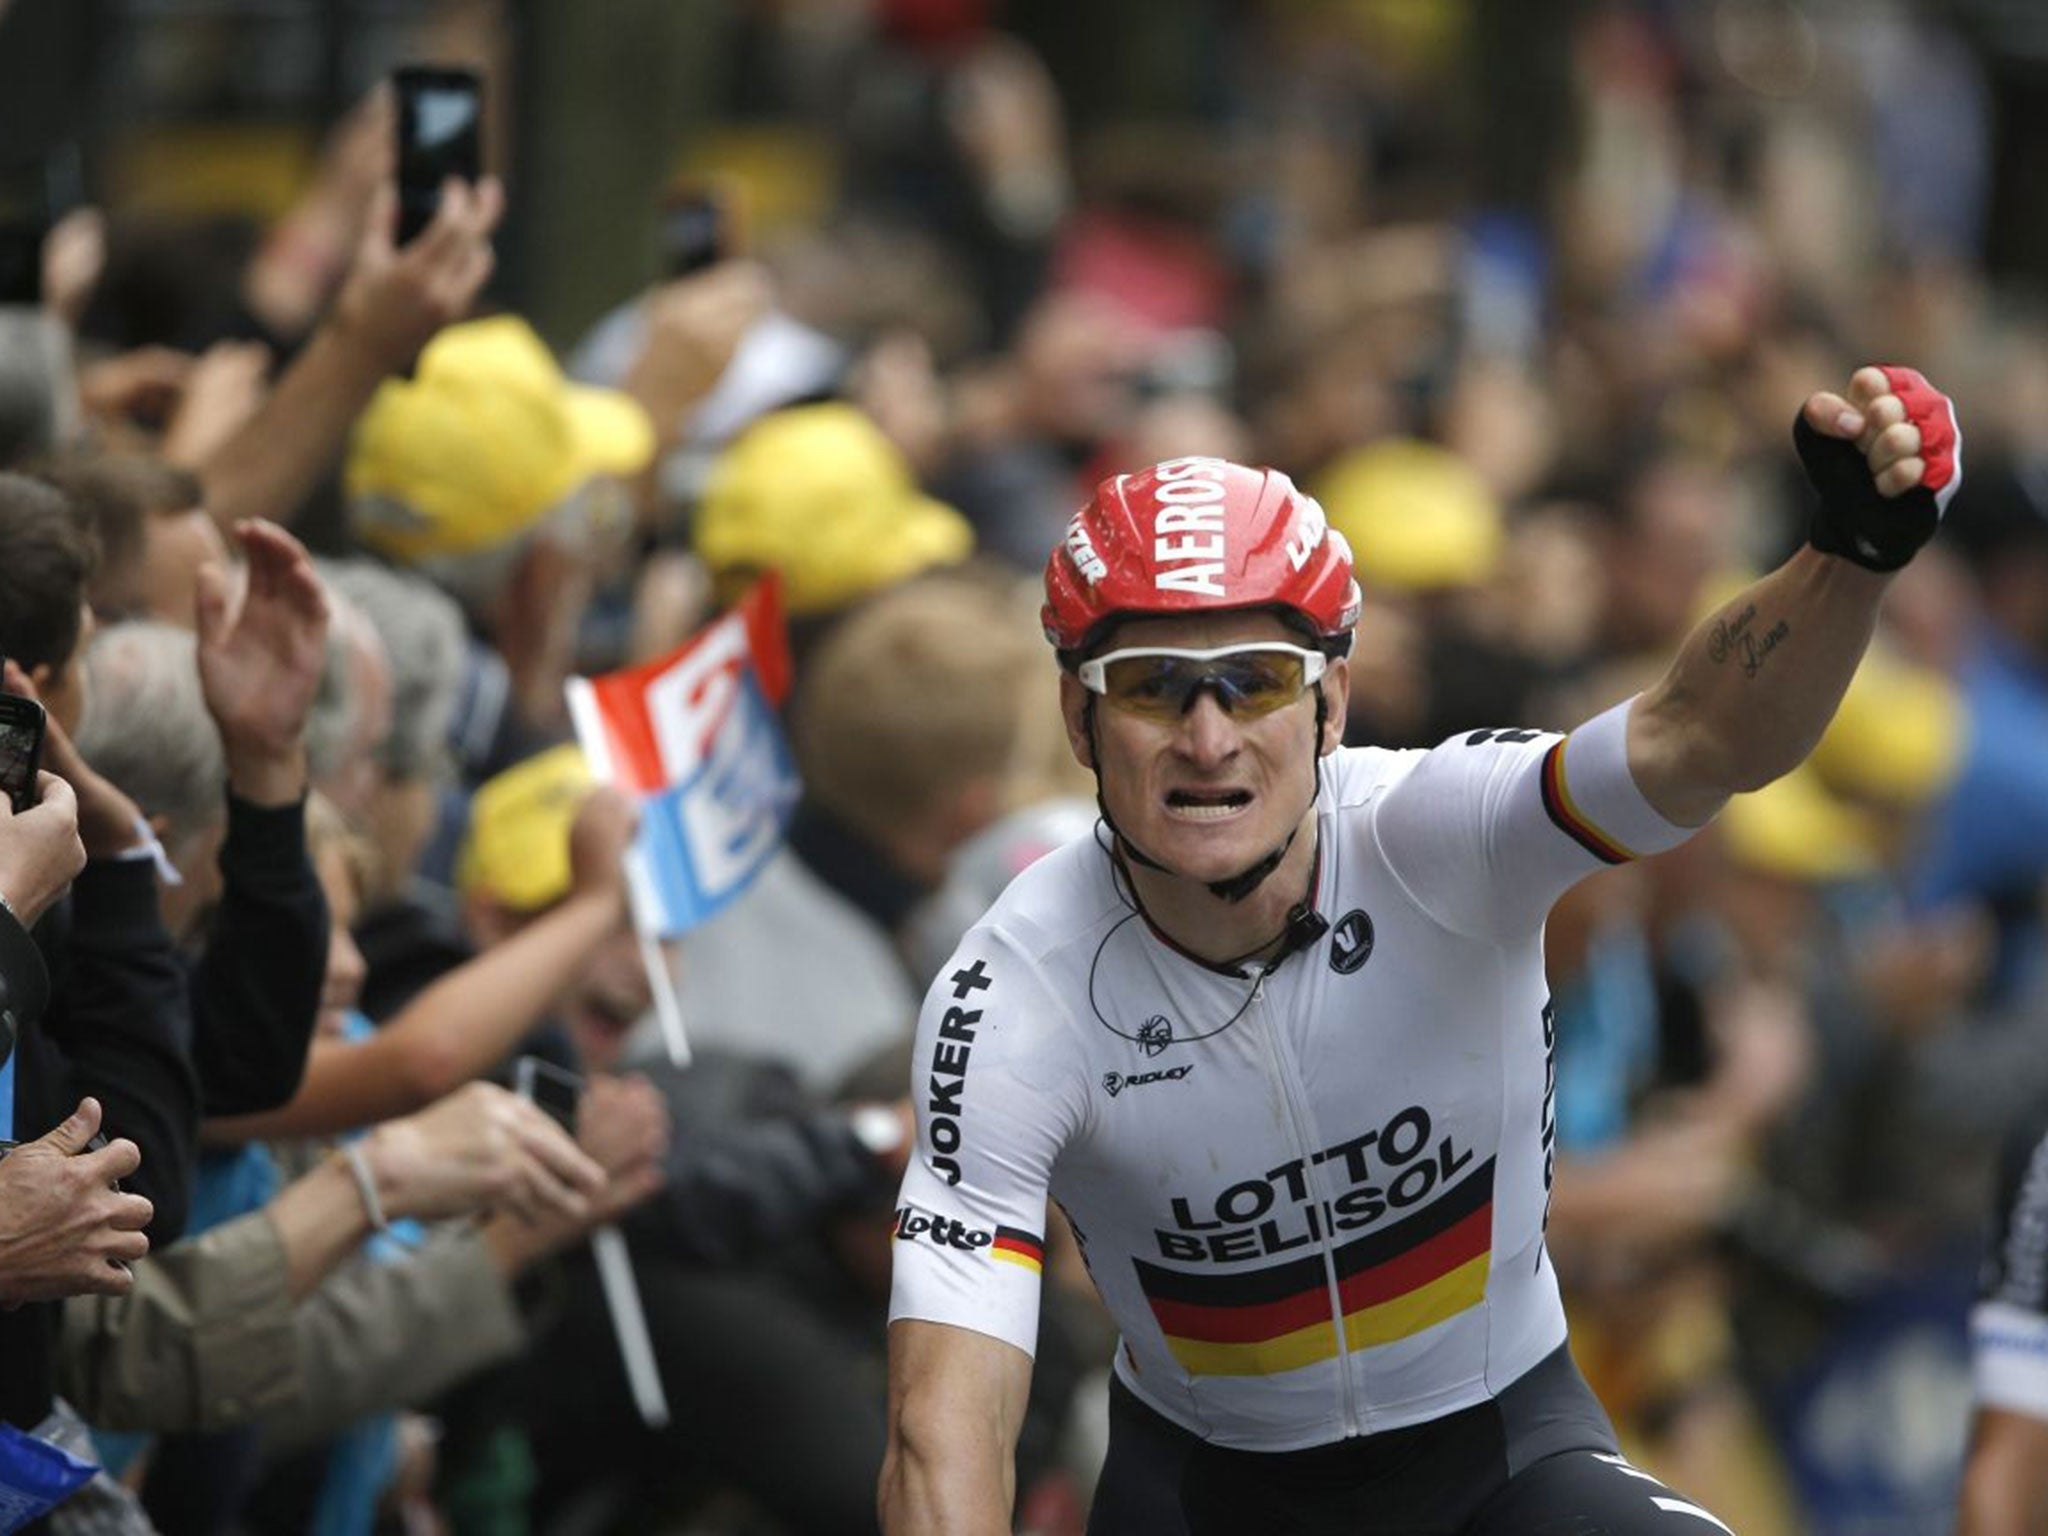 Germany's Andre Greipel crosses the finish line to win the sixth stage of the Tour de France cycling race over 194 kilometers (120.5 miles) with start in Arras and finish in Reims, France